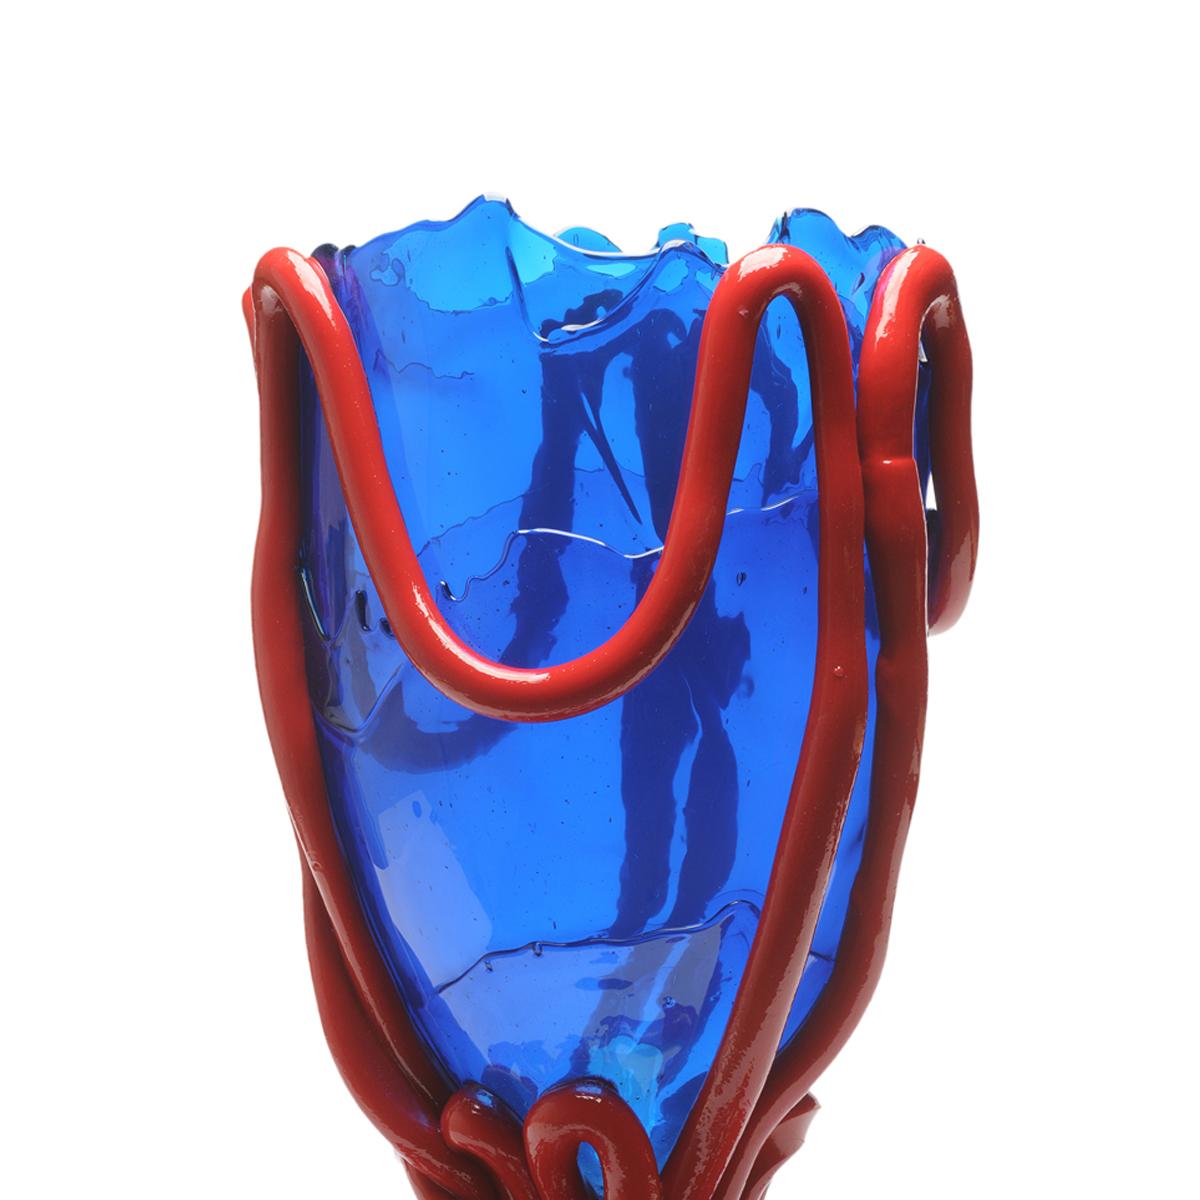 Indian summer vase, clear blue, matt red

Vase in soft resin designed by Gaetano Pesce in 1995 for Fish Design collection.
Measures: L ø 22cm x H 36cm
Colours: clear blue, matt red

Other sizes available.

Vase in soft resin designed by Gaetano